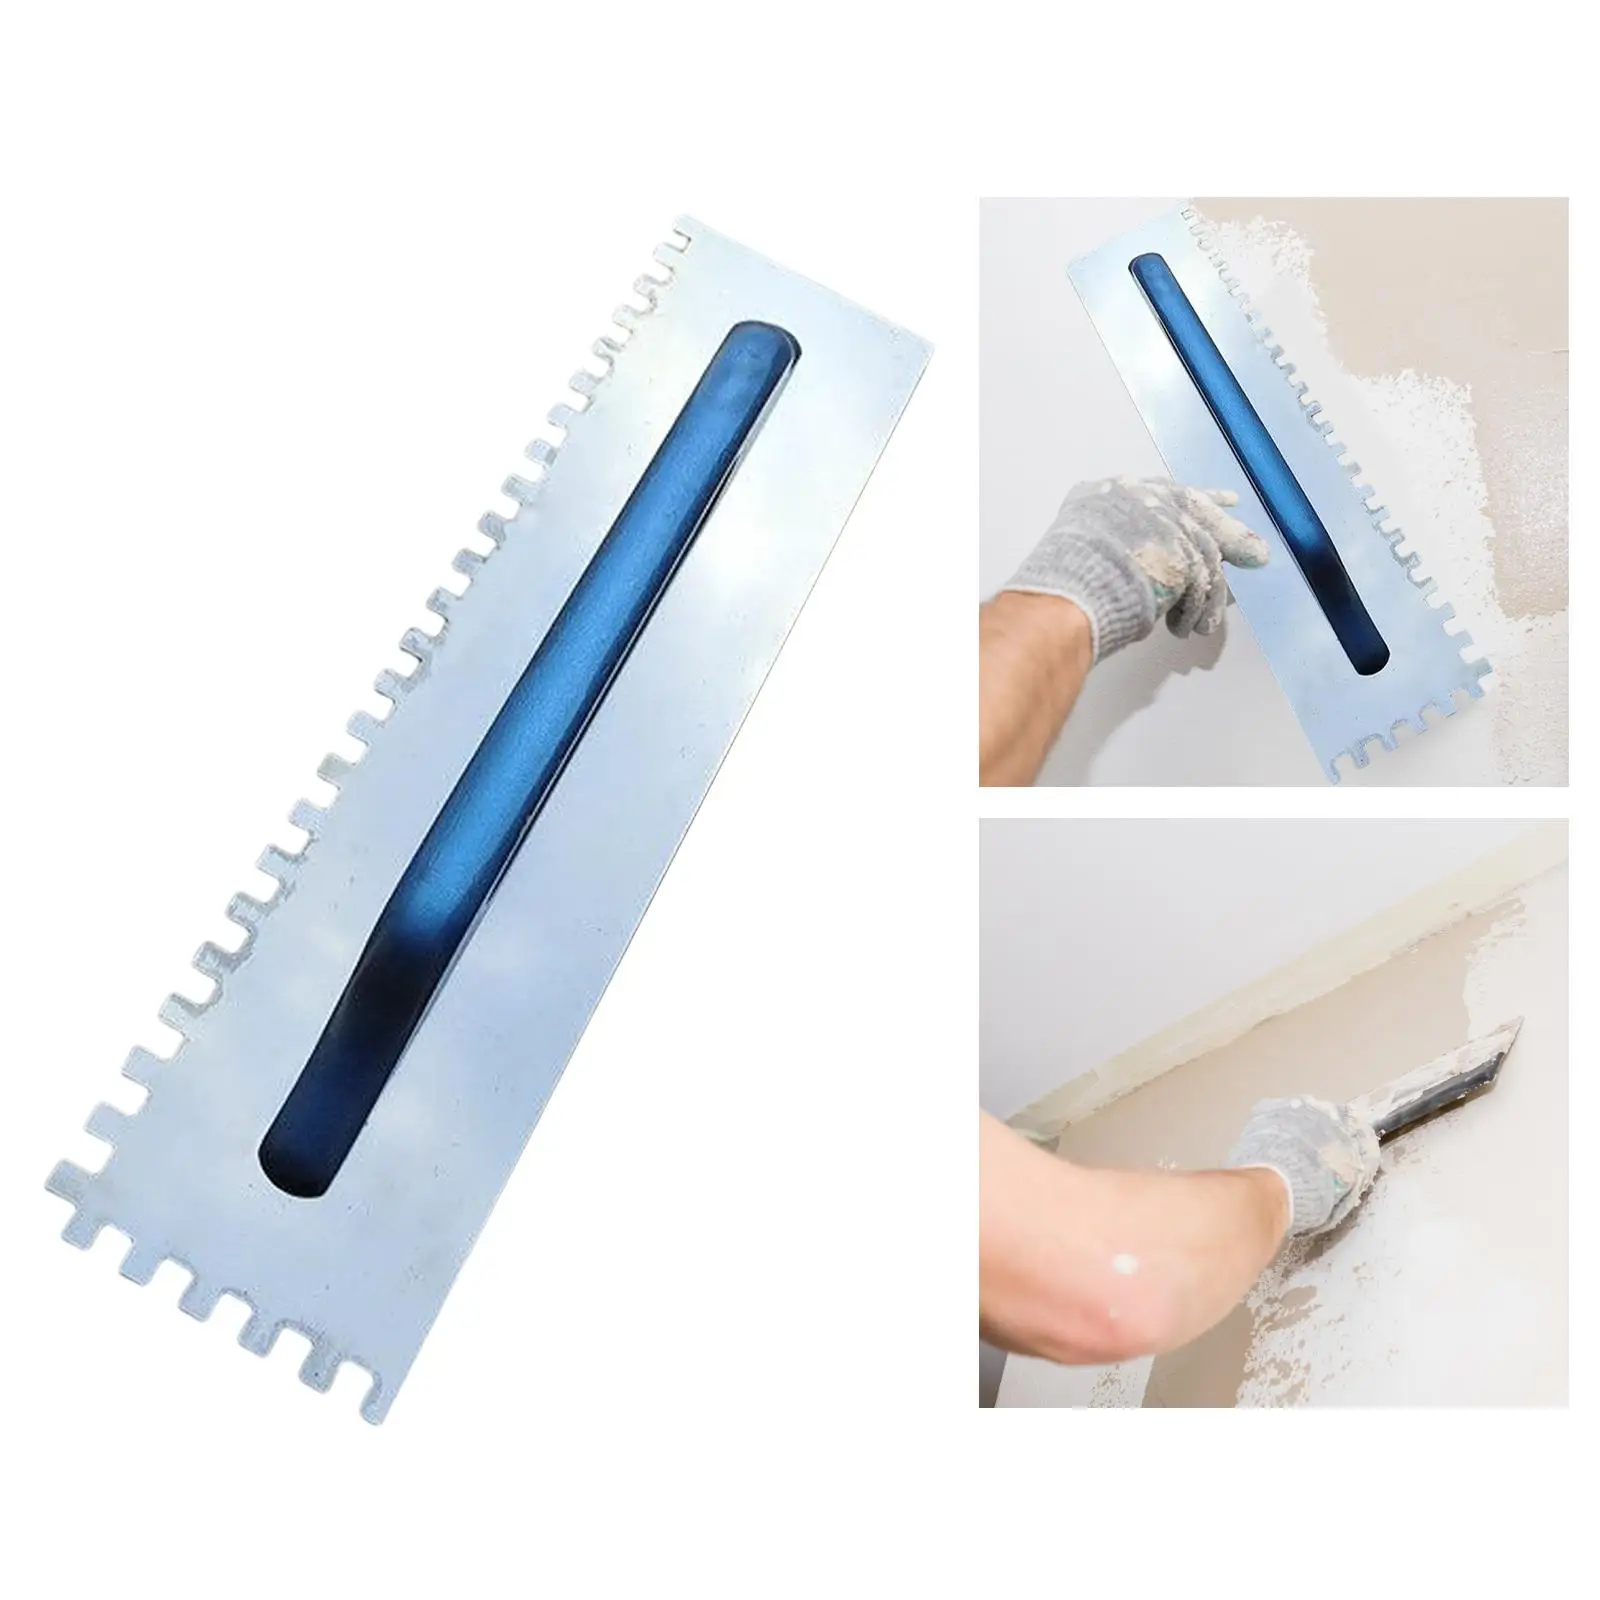 Drywall Smoothing Tool Concrete Scraping Tool Putty Tool Plaster Trowel